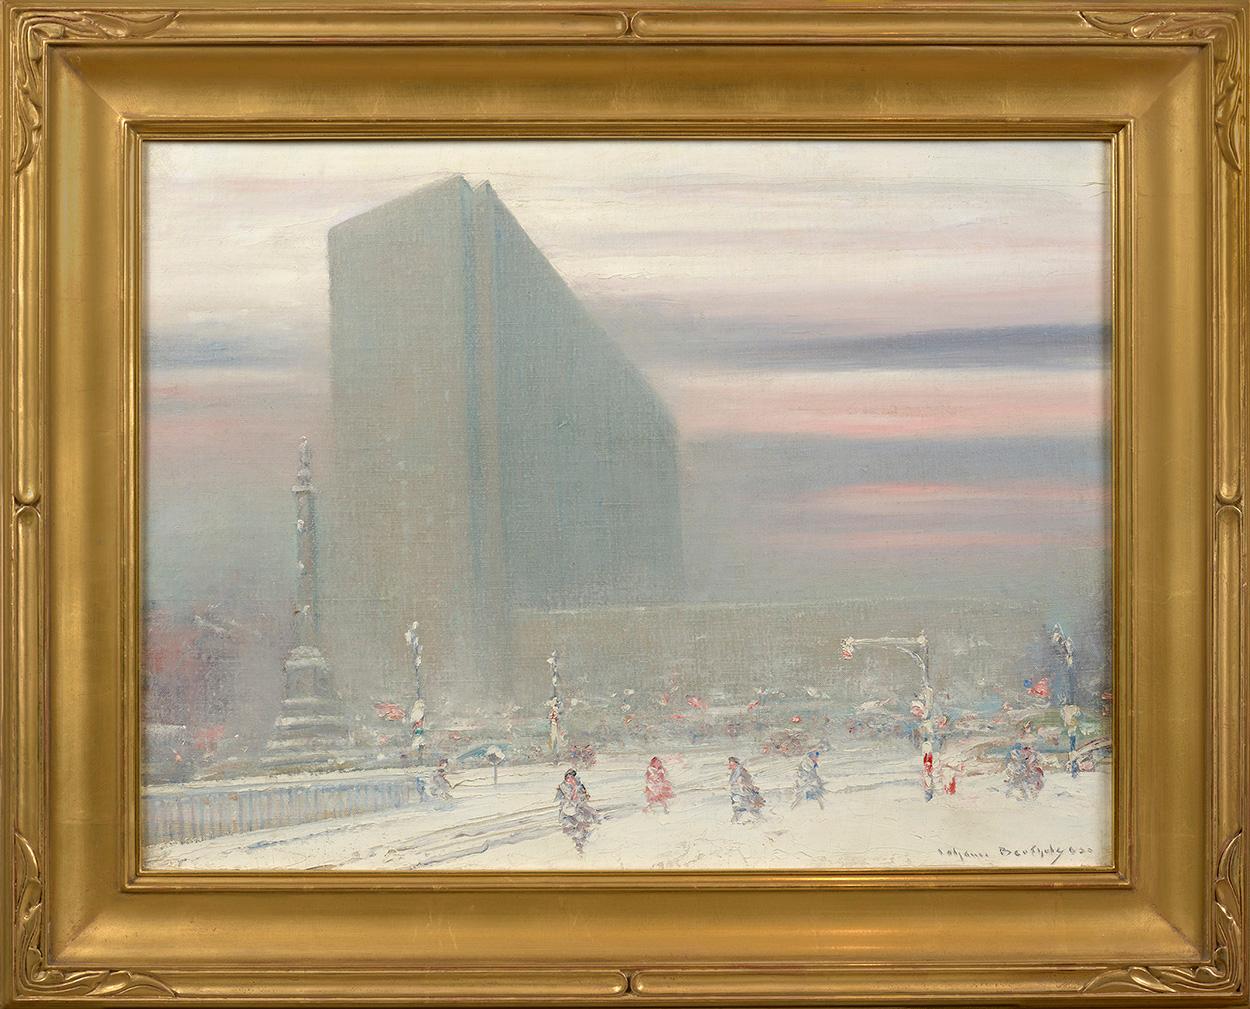 Johann Berthelsen paints a number of pedestrians walking along a snowy New York City street in front of an impressive building in his artwork entitled, “New York Coliseum”